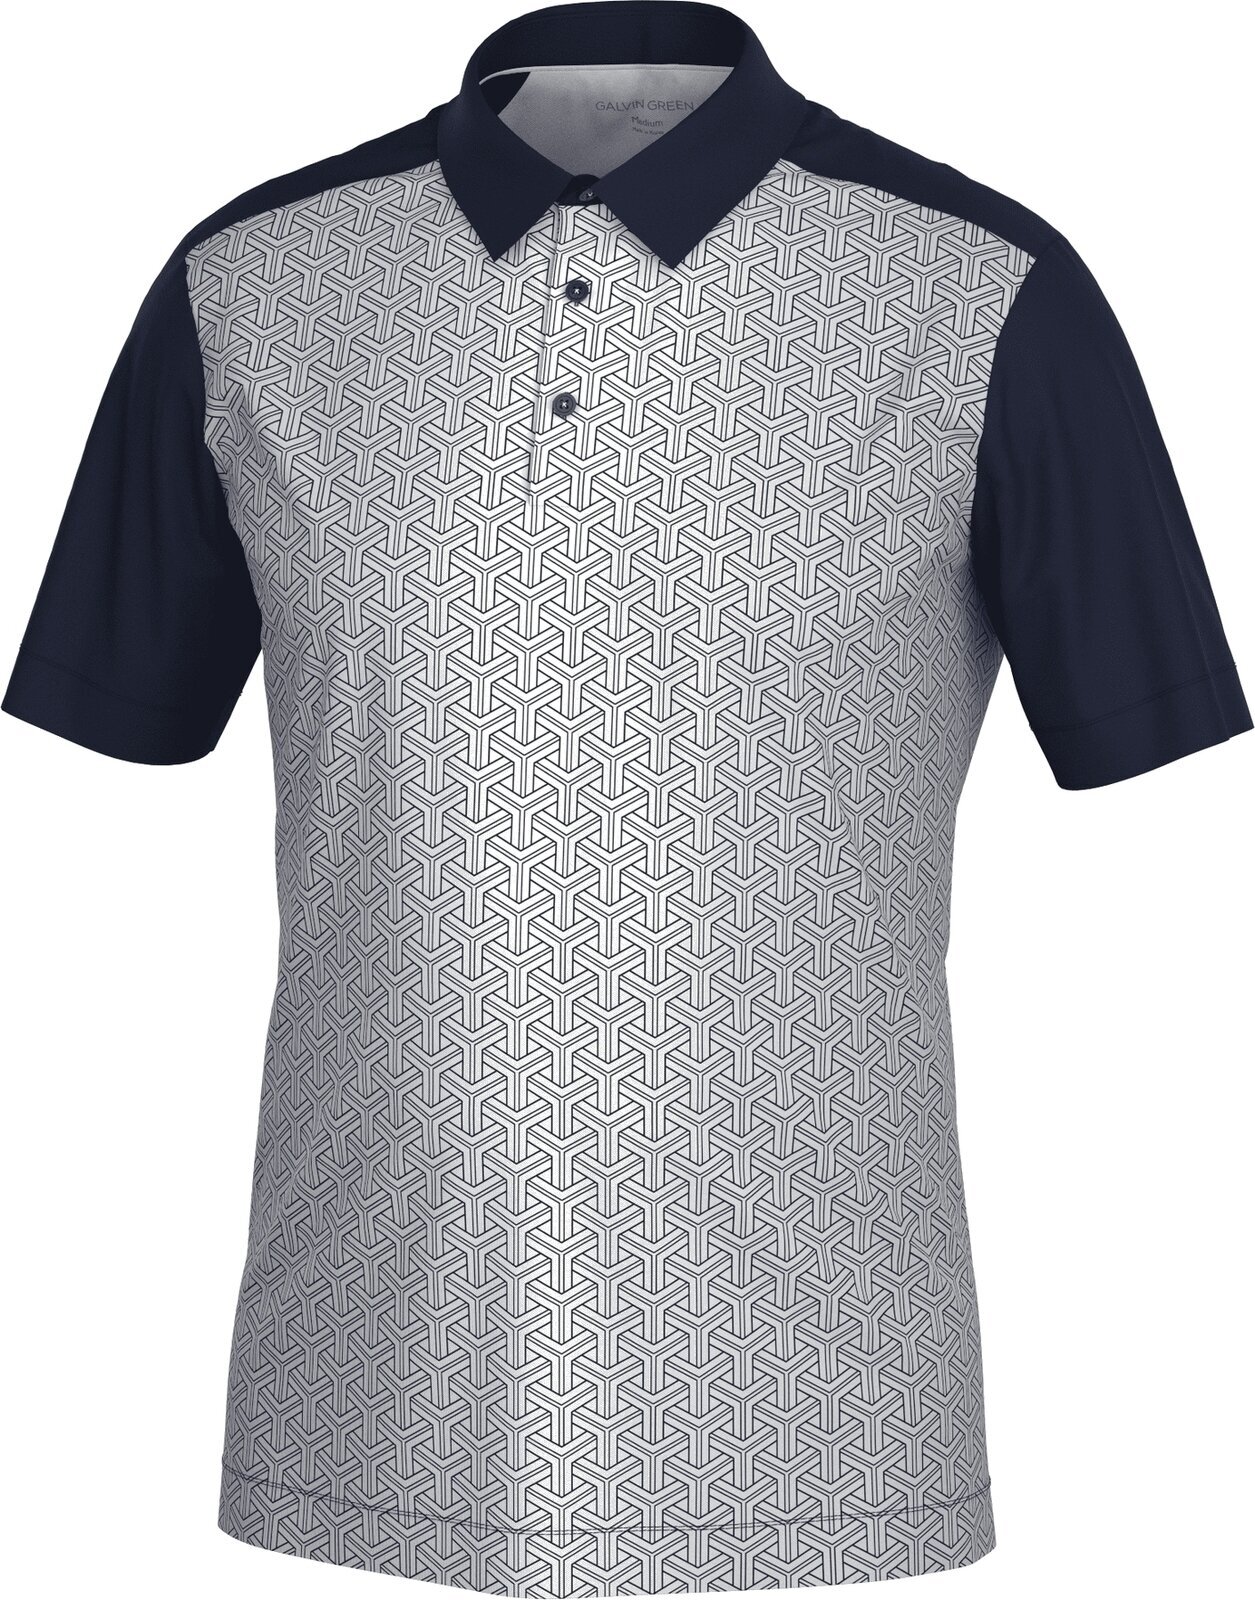 Chemise polo Galvin Green Mile Mens Breathable Short Sleeve Shirt Navy/Cool Grey XL